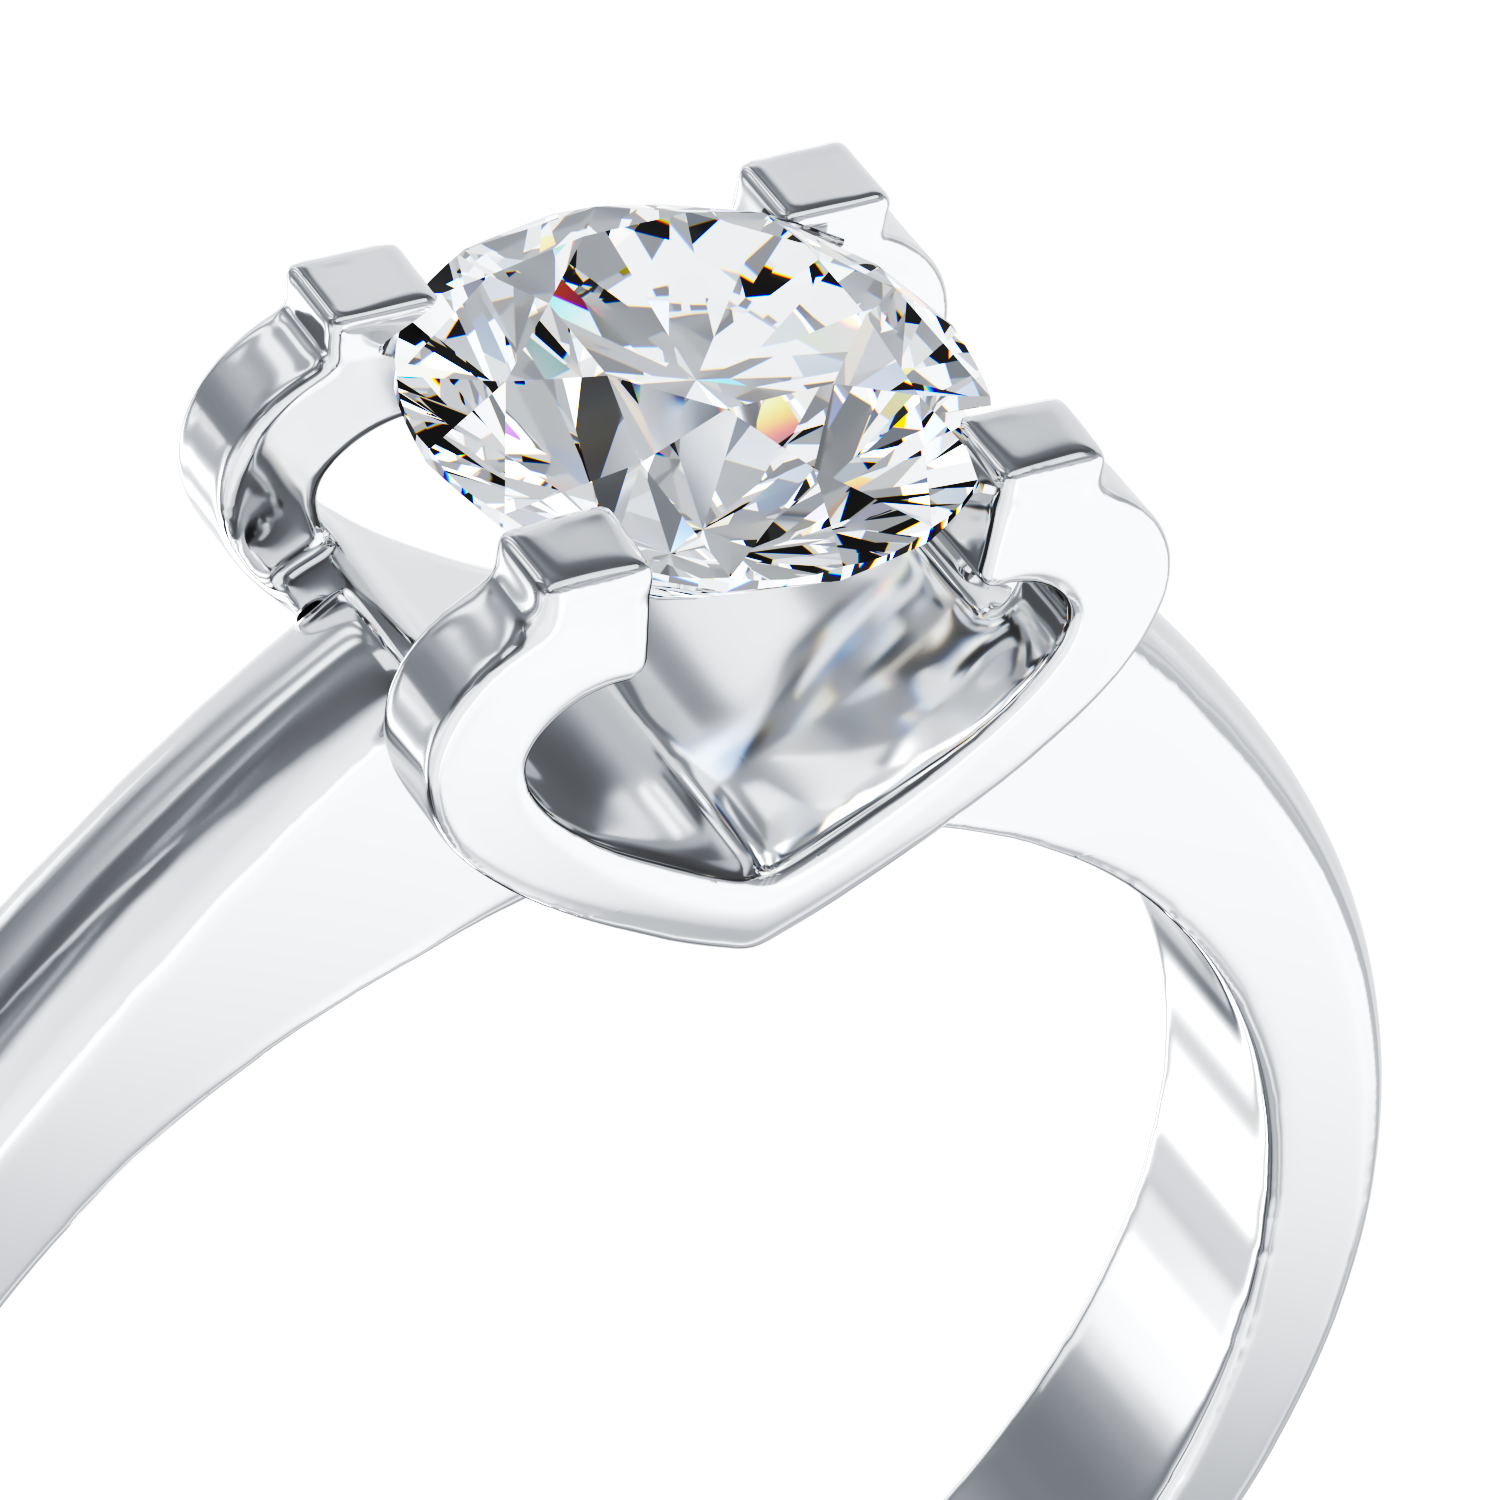 18K white gold engagement ring with 0.4ct solitaire diamond